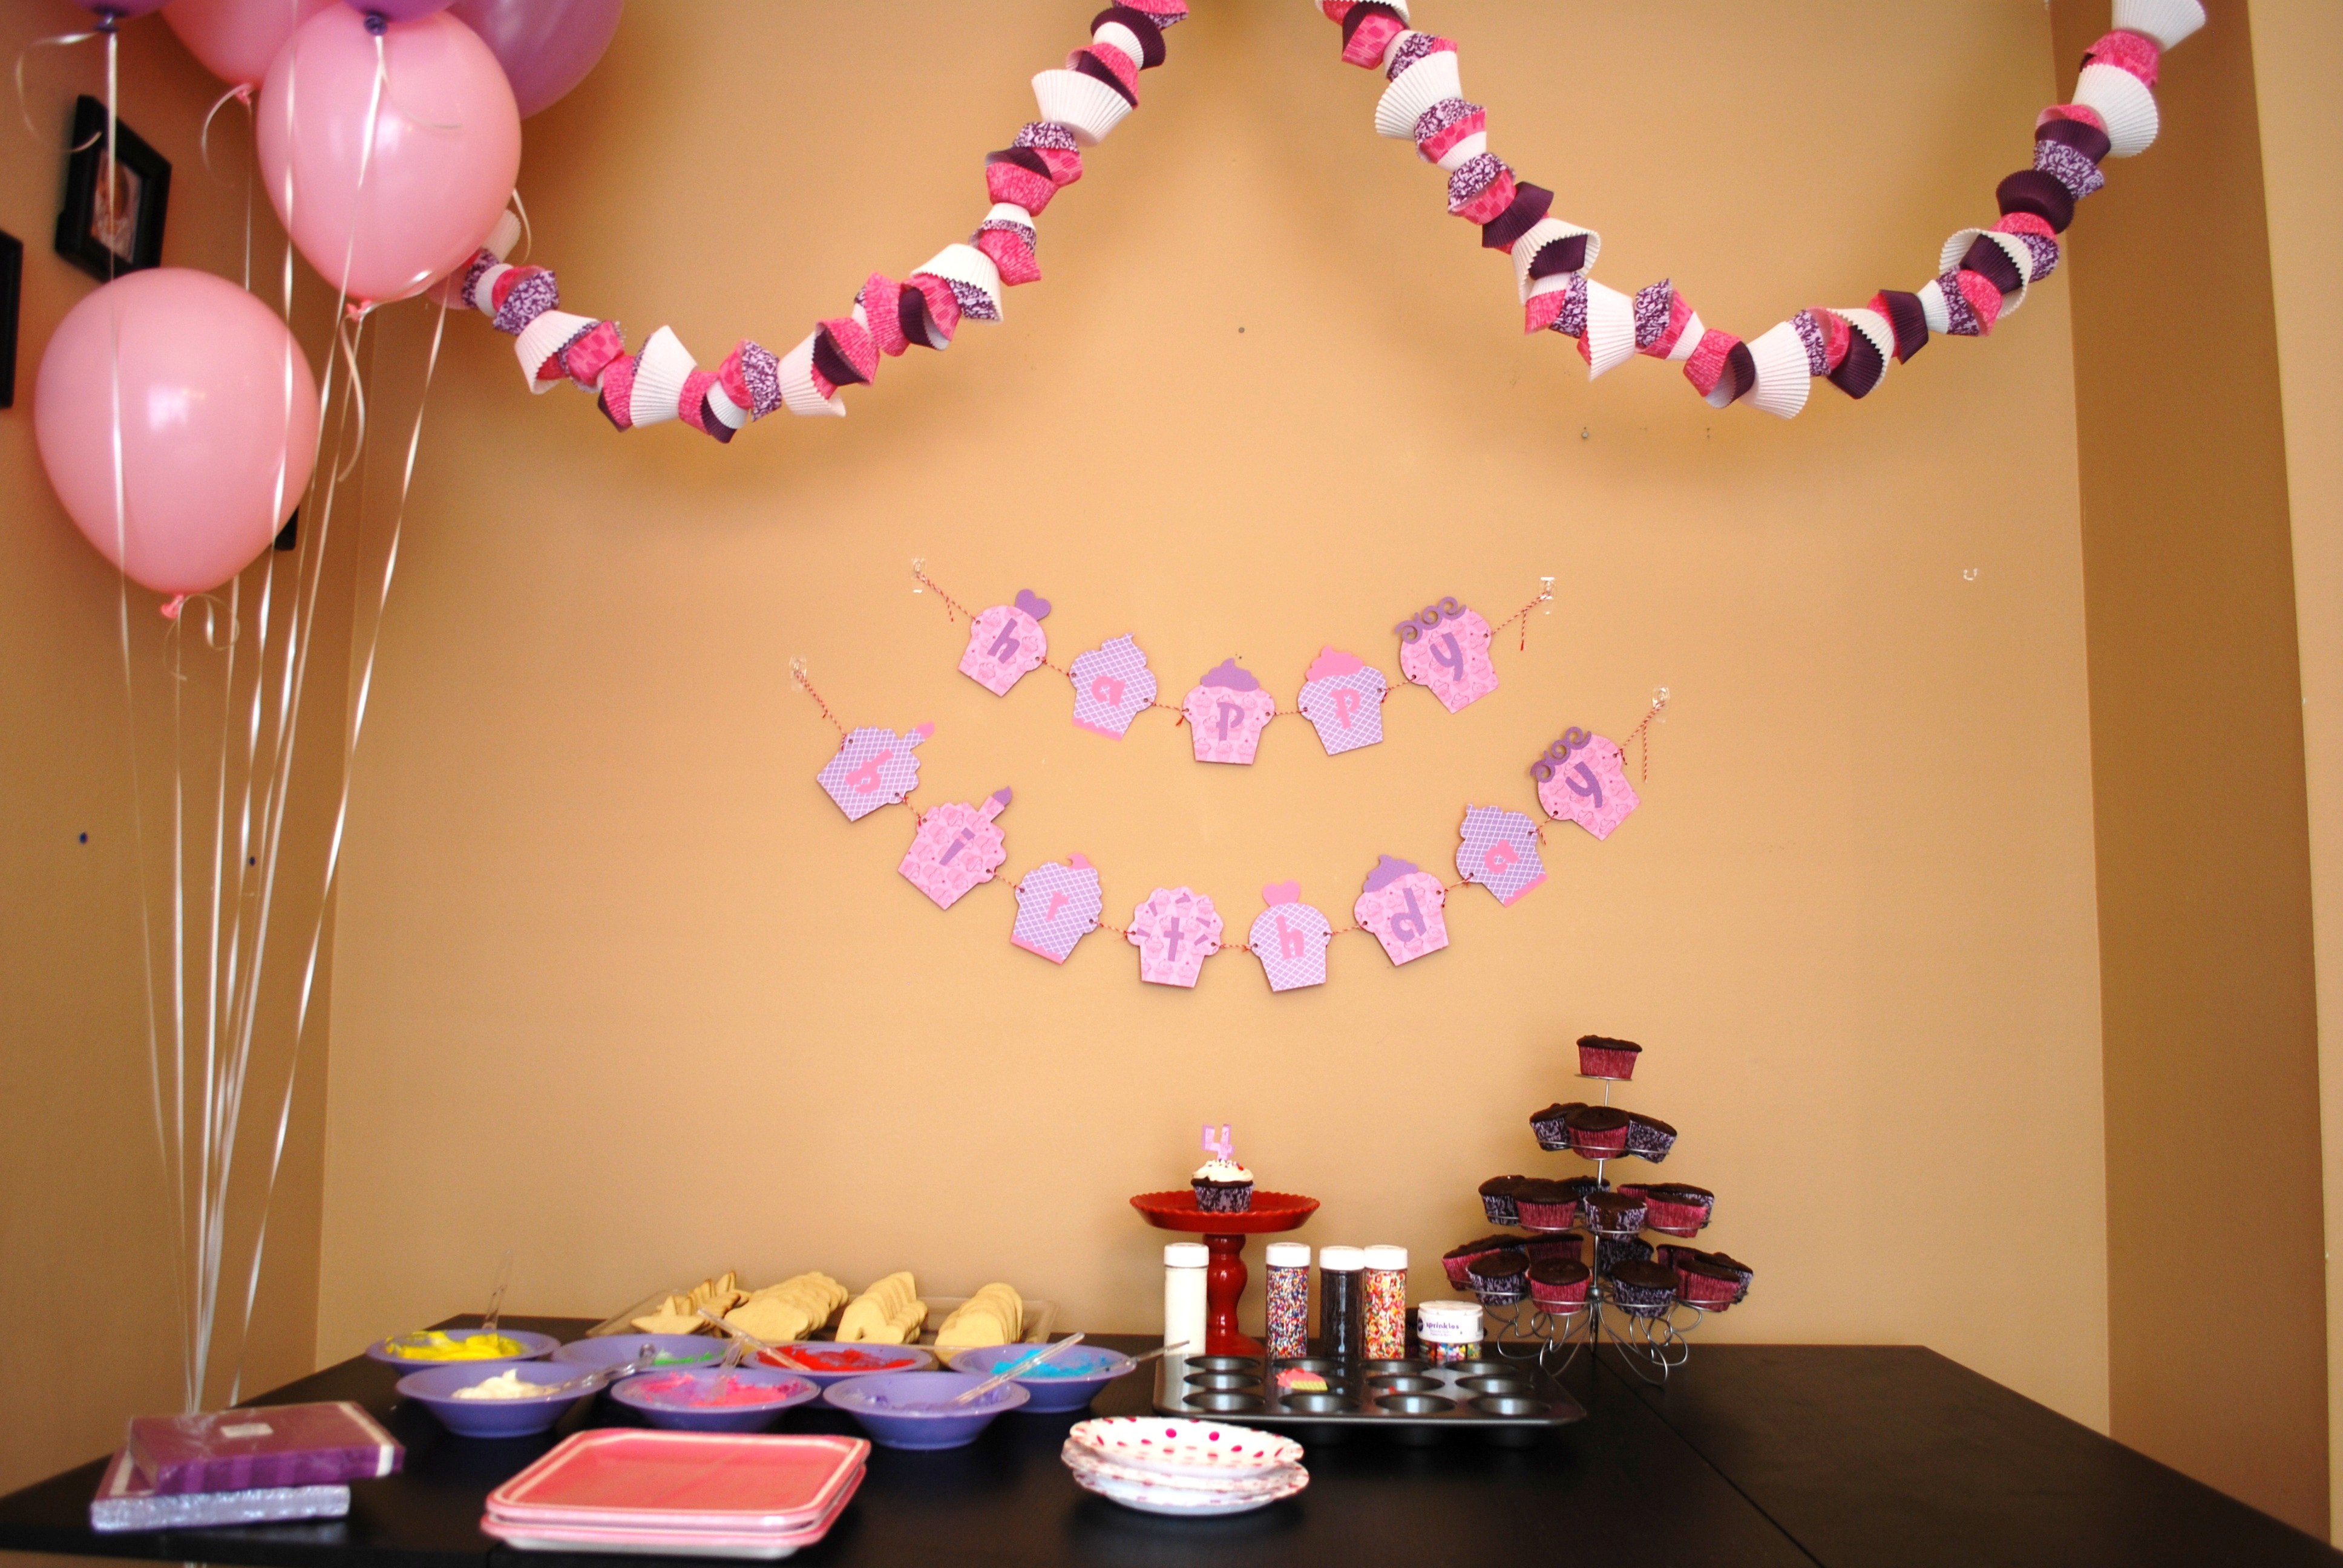 birthday celebration ideas for husband at home